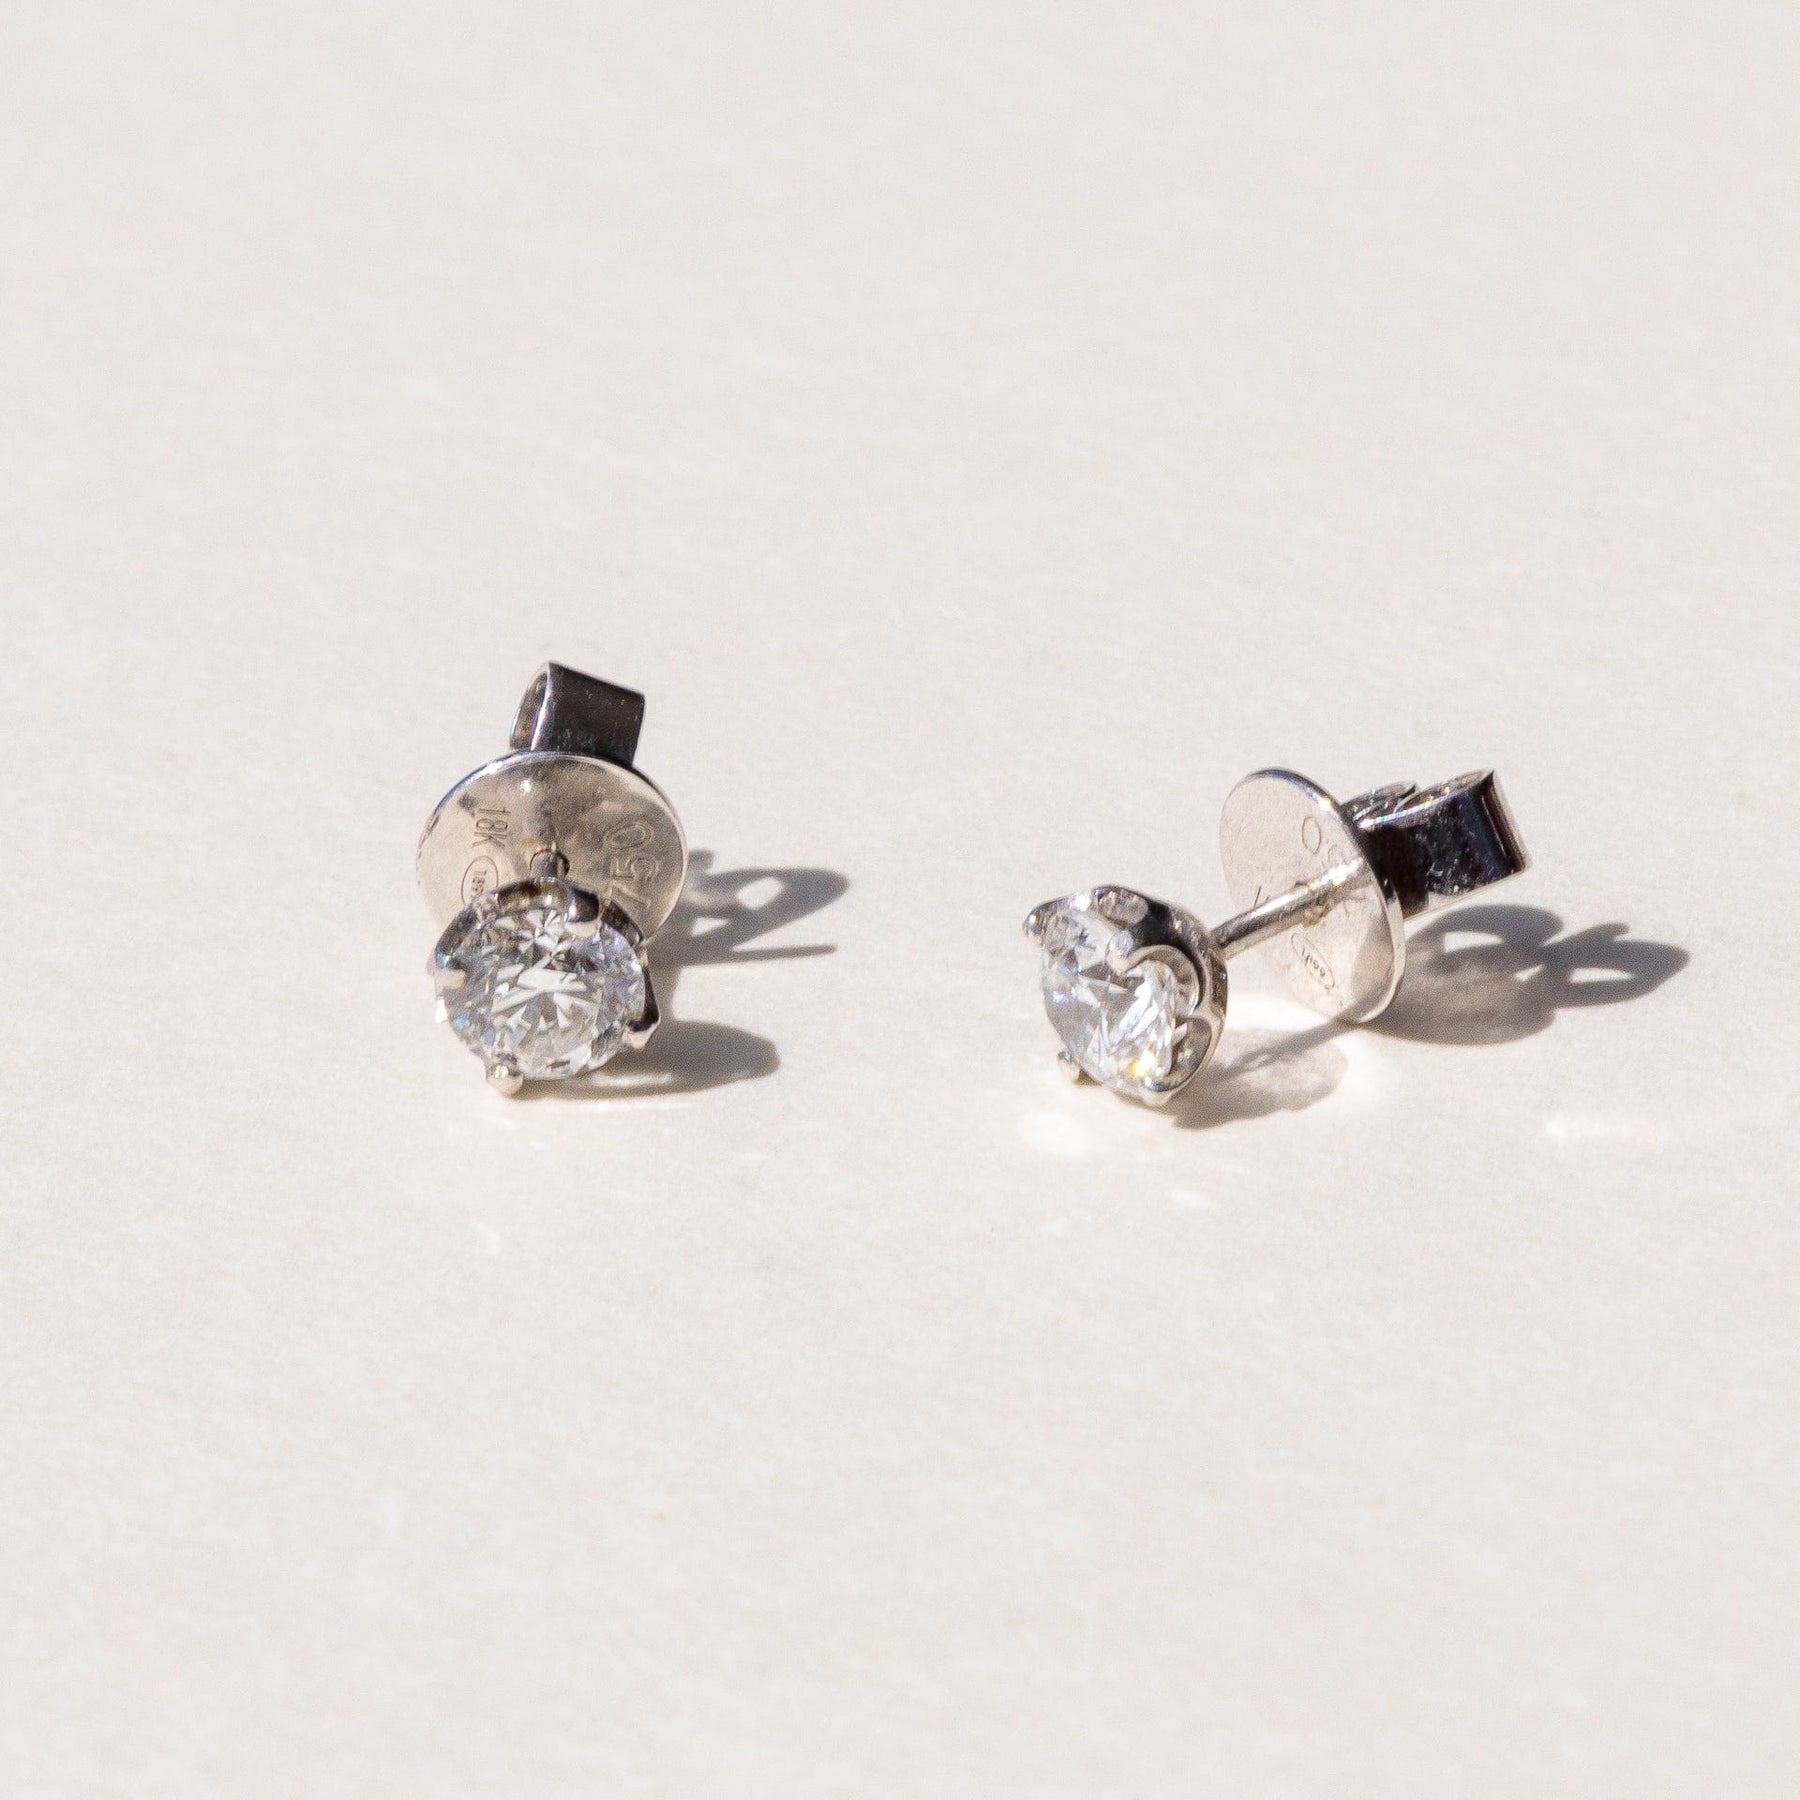 High Quality Diamond Stud Earrings handcrafted in Auckland